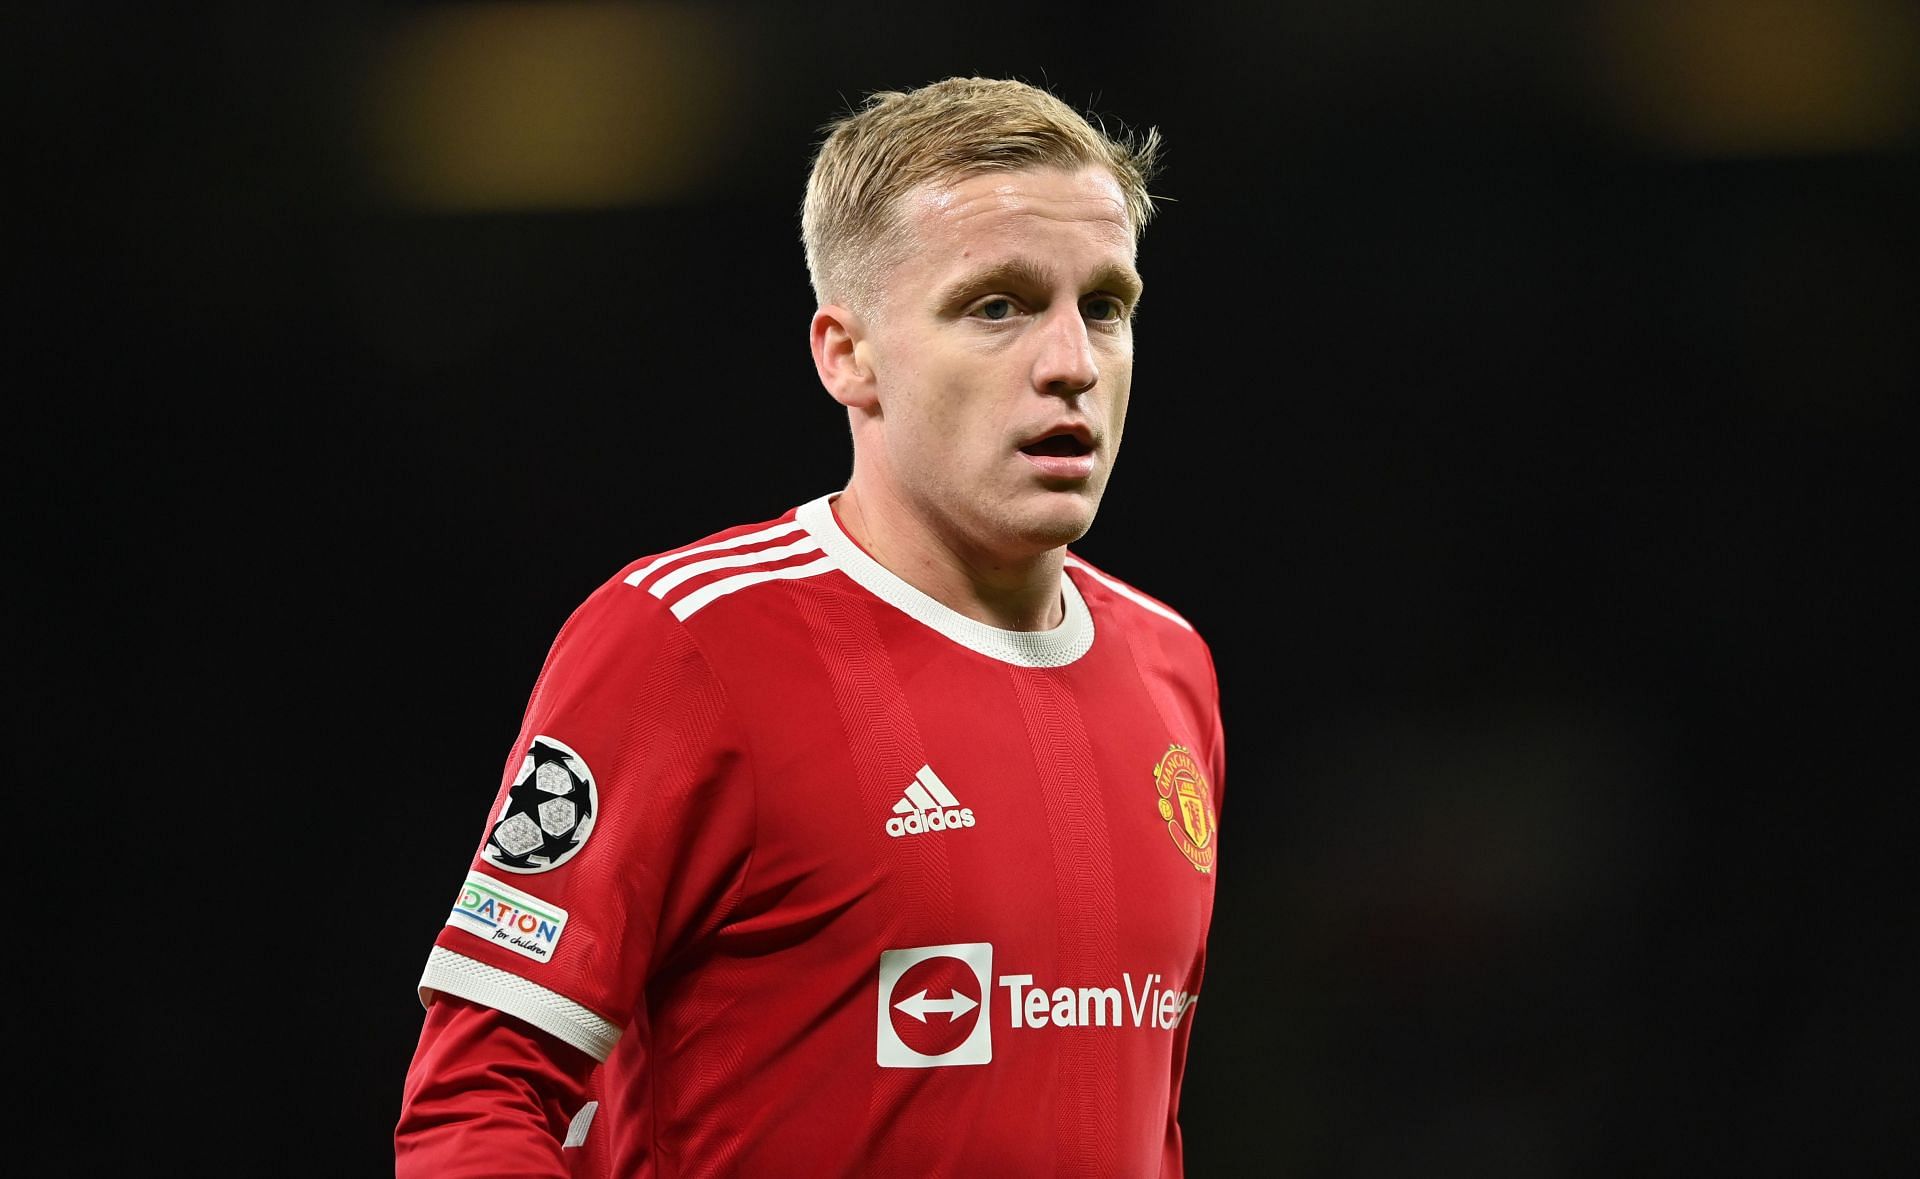 Everton have struck a deal with Manchester United to take Donny van de Beek on loan.